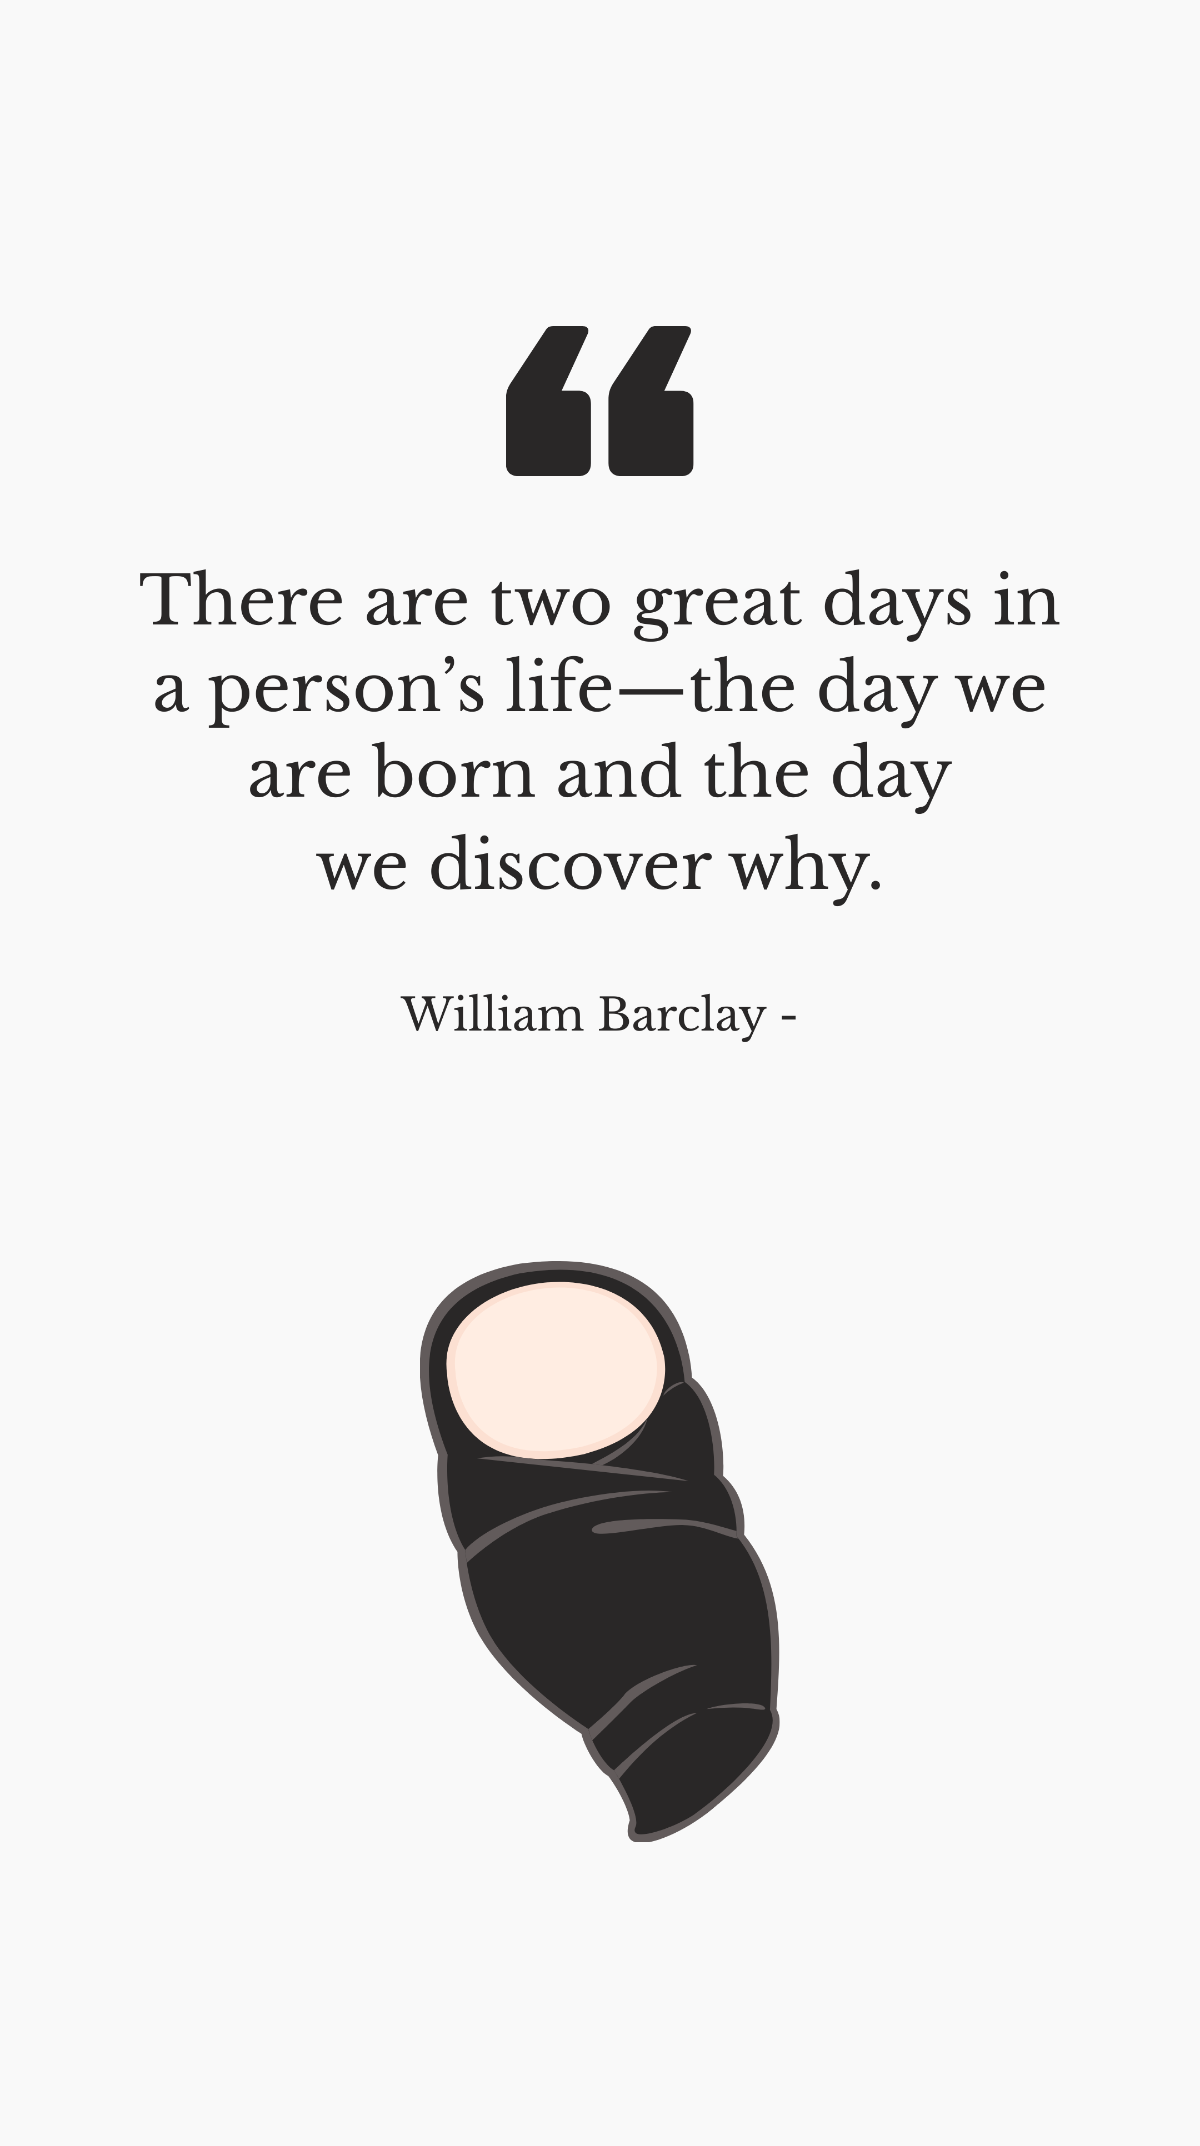 William Barclay - There are two great days in a person’s life—the day we are born and the day we discover why. Template